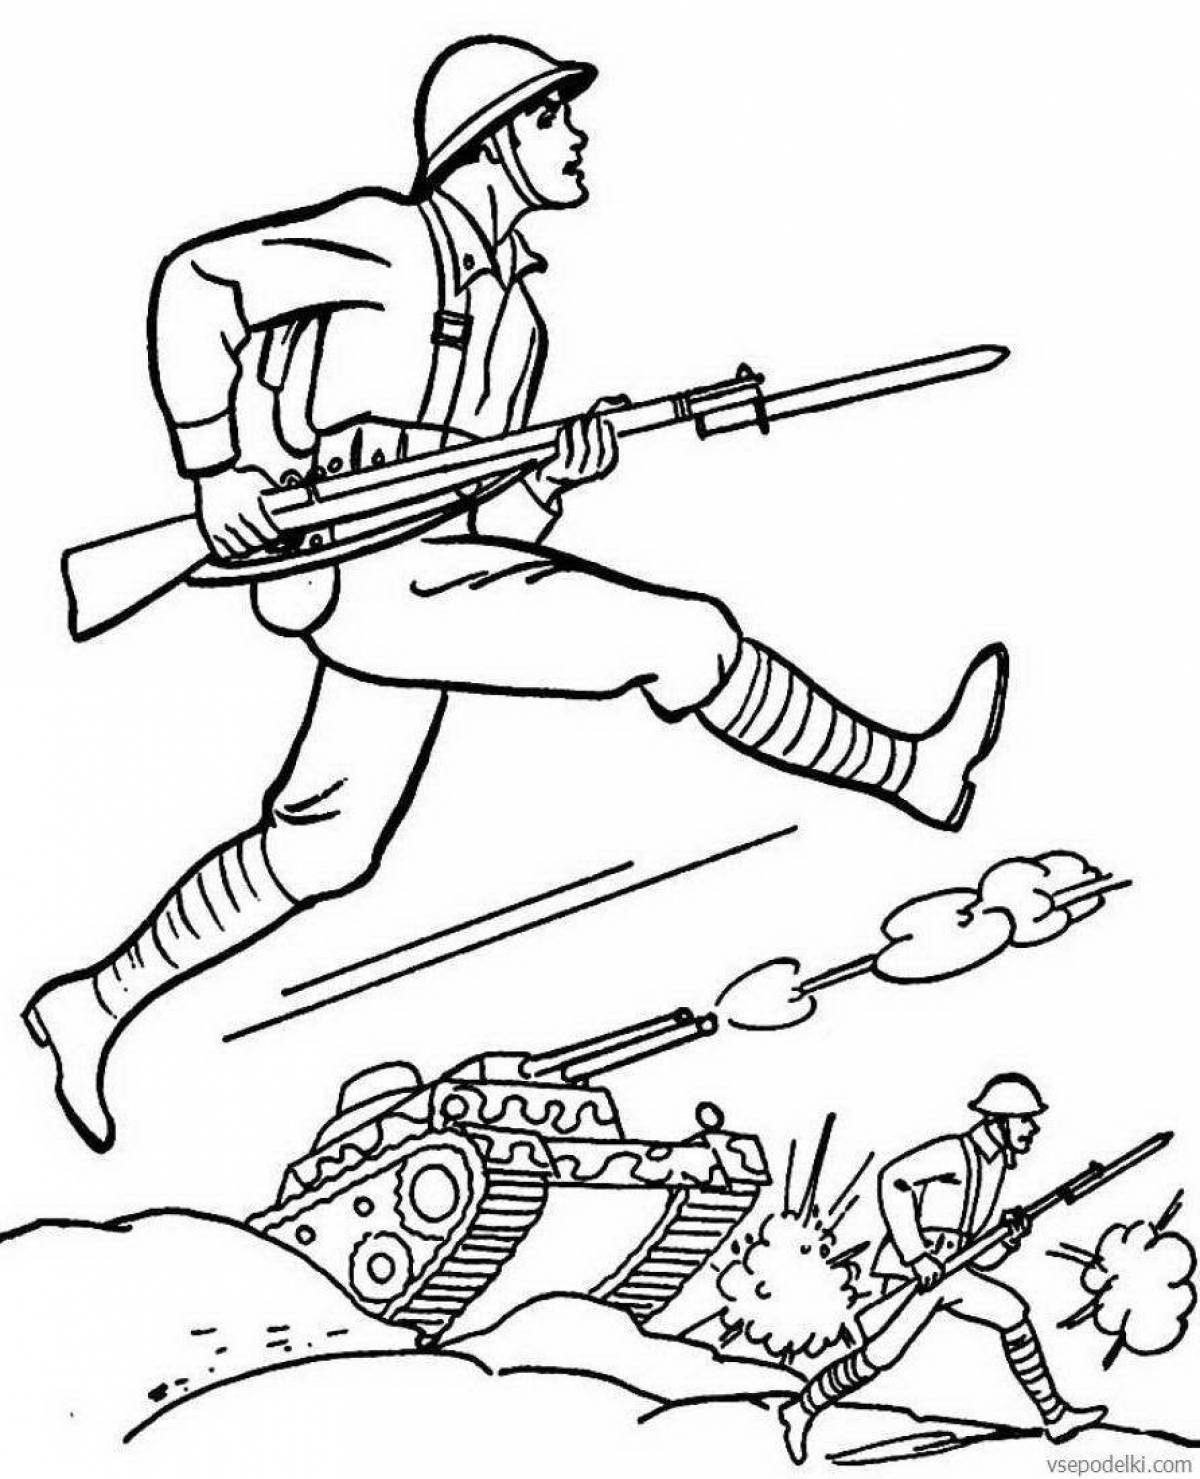 Coloring page dazzling defenders of the fatherland